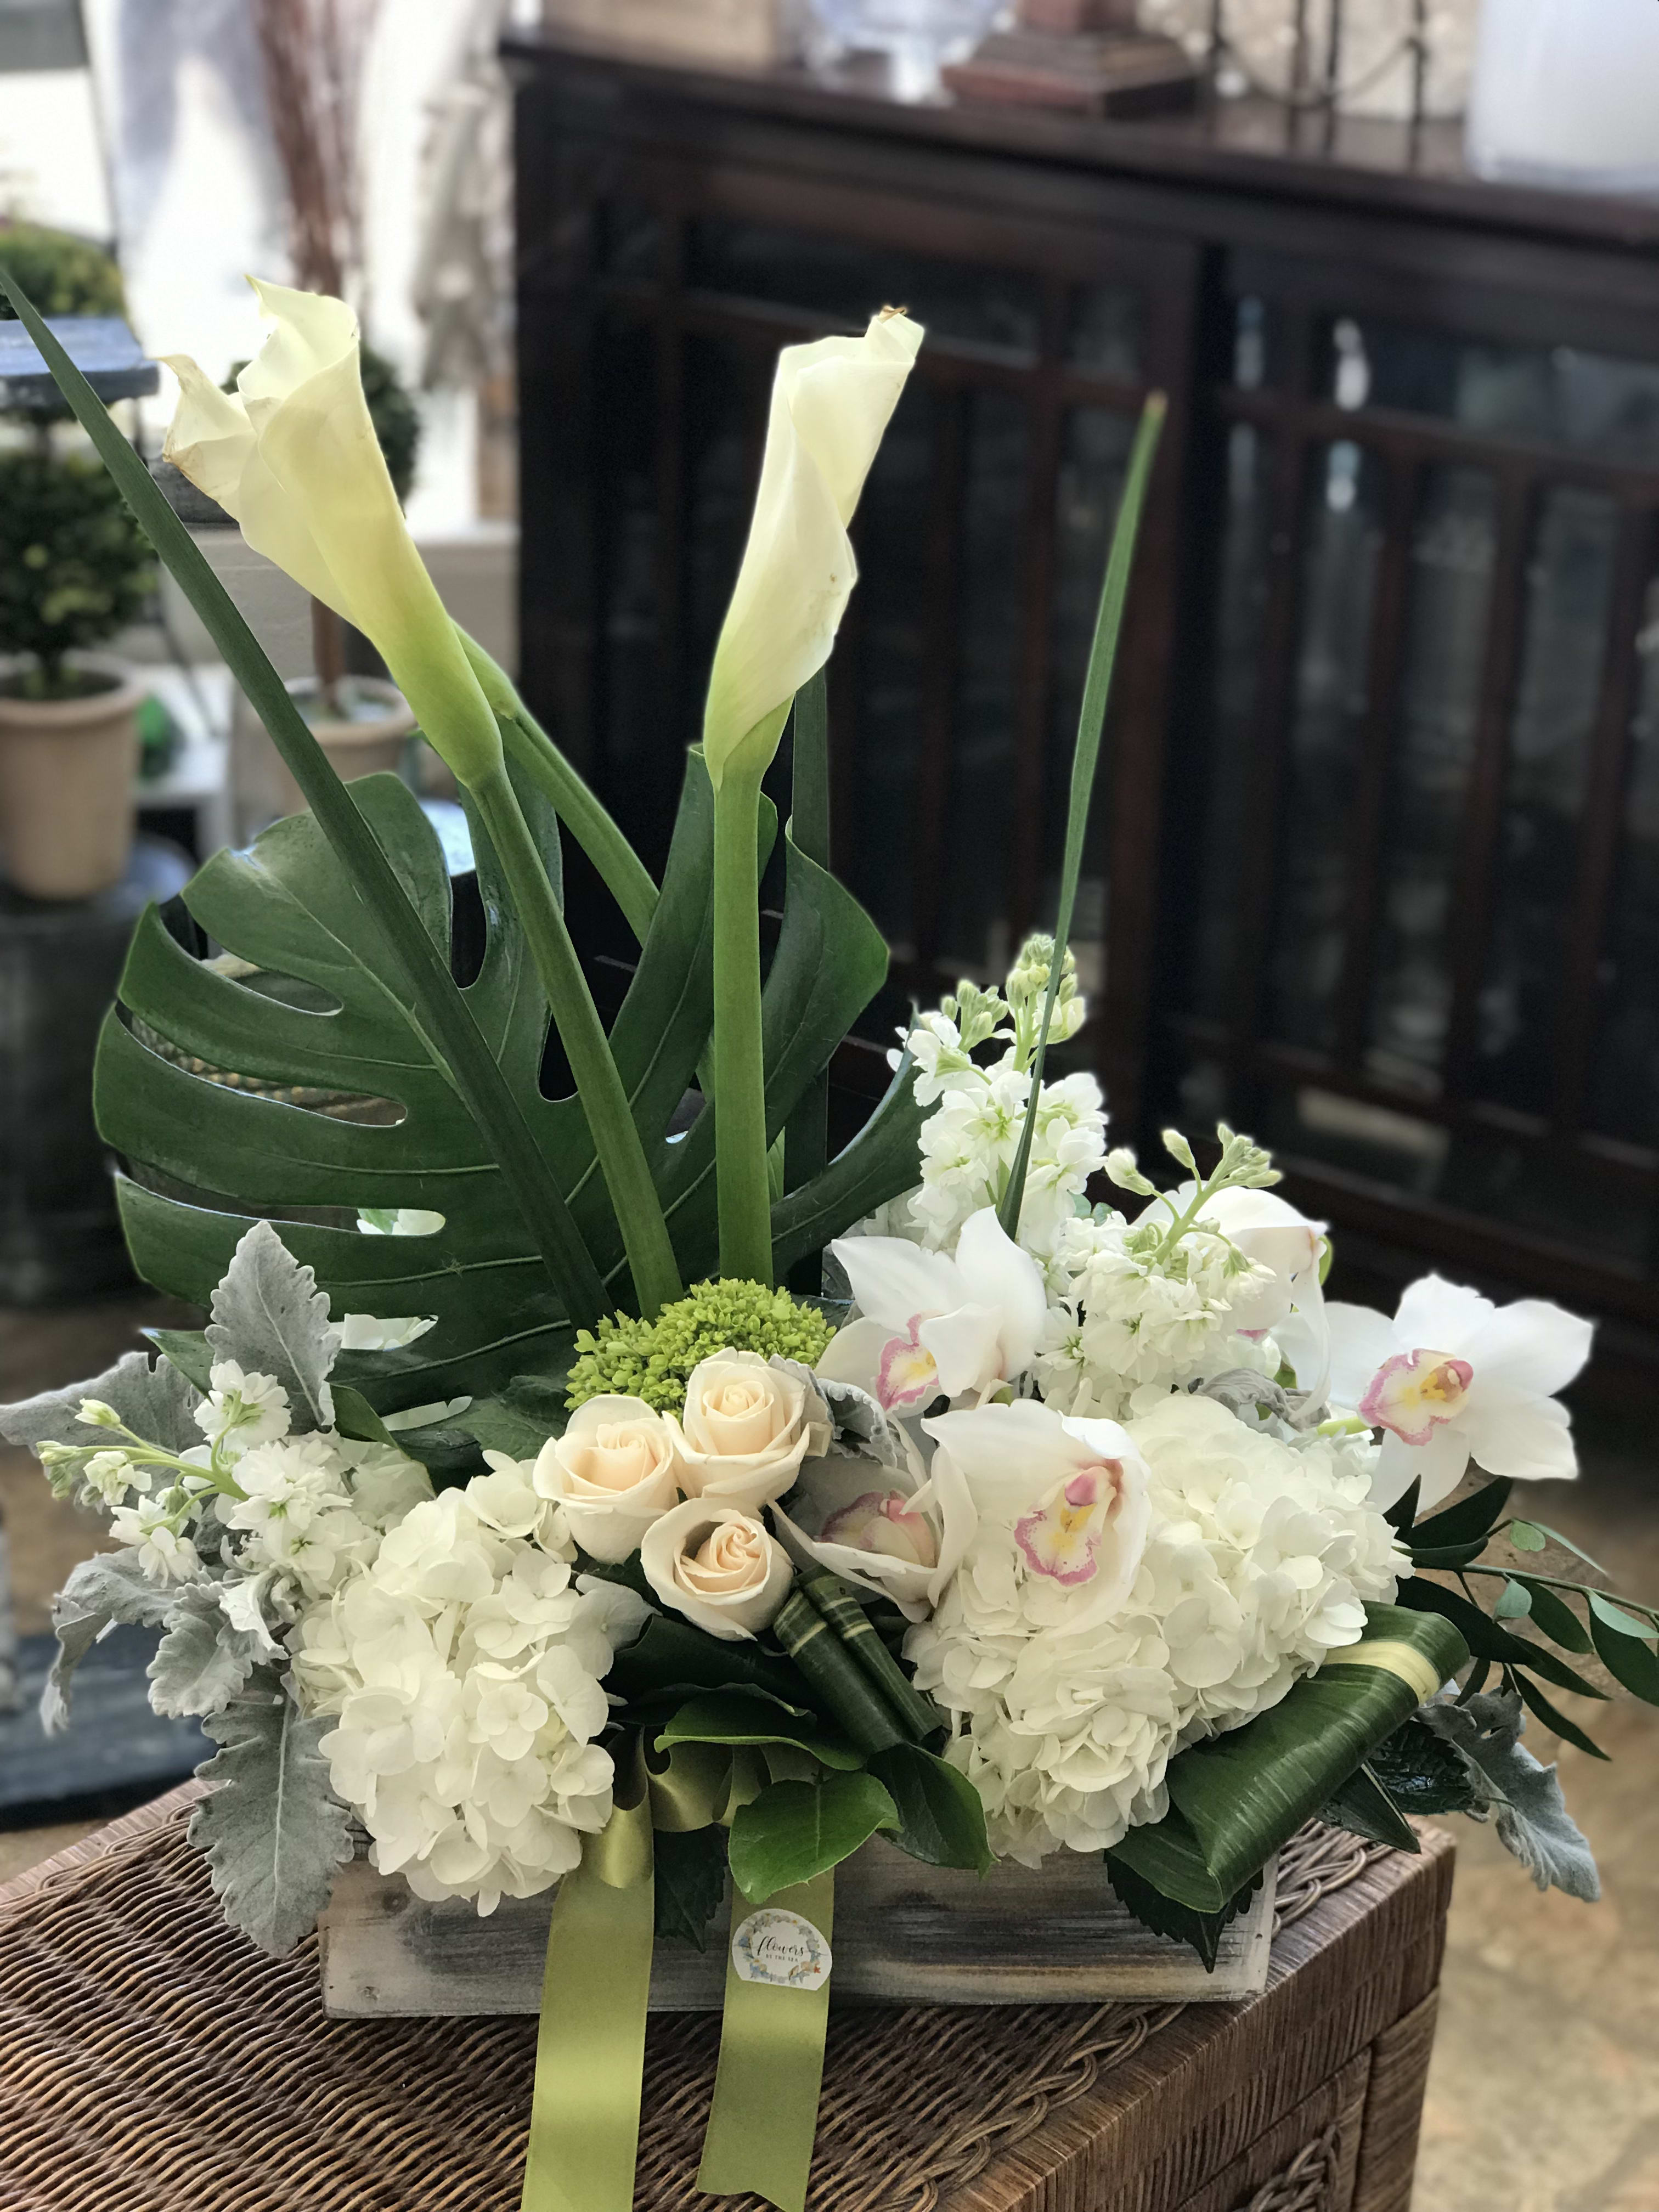 Sweet Dream - Beautiful, white hydrangea , enchanted cymbidiums, finished beautifully with roses, tall calla lilies  and tropical  greens. Rustic elegance in a lovely wood box.  